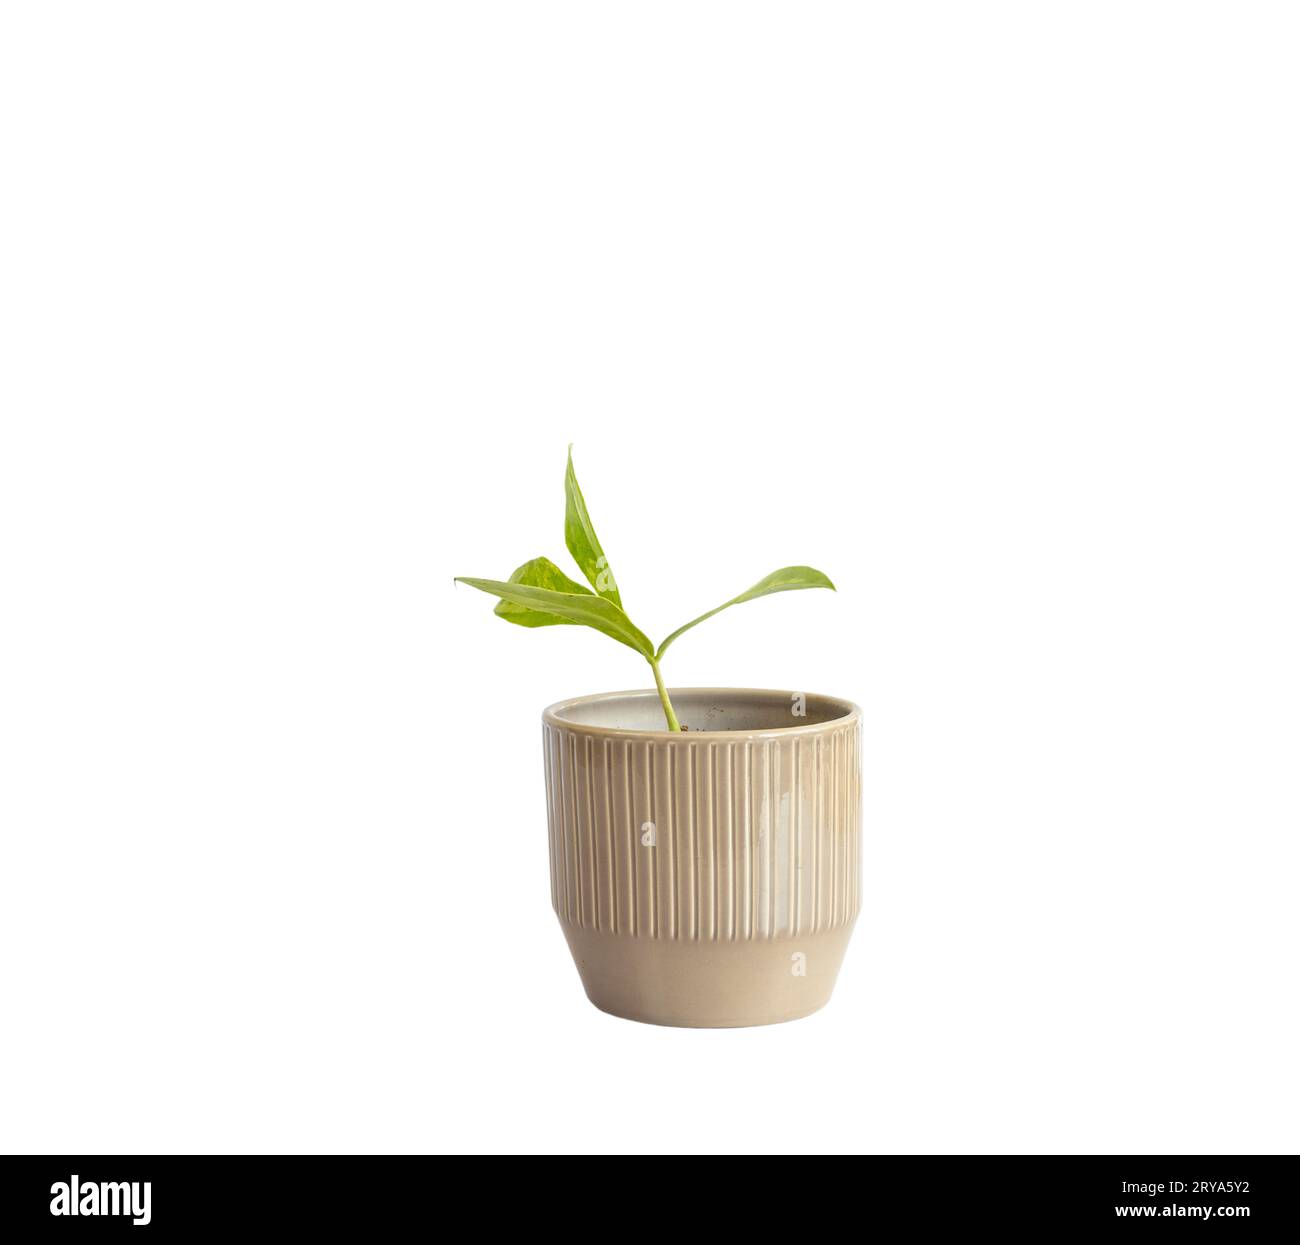 ZZ variegated plant with elongated leaves in a ceramic pot isolated on white background Stock Photo